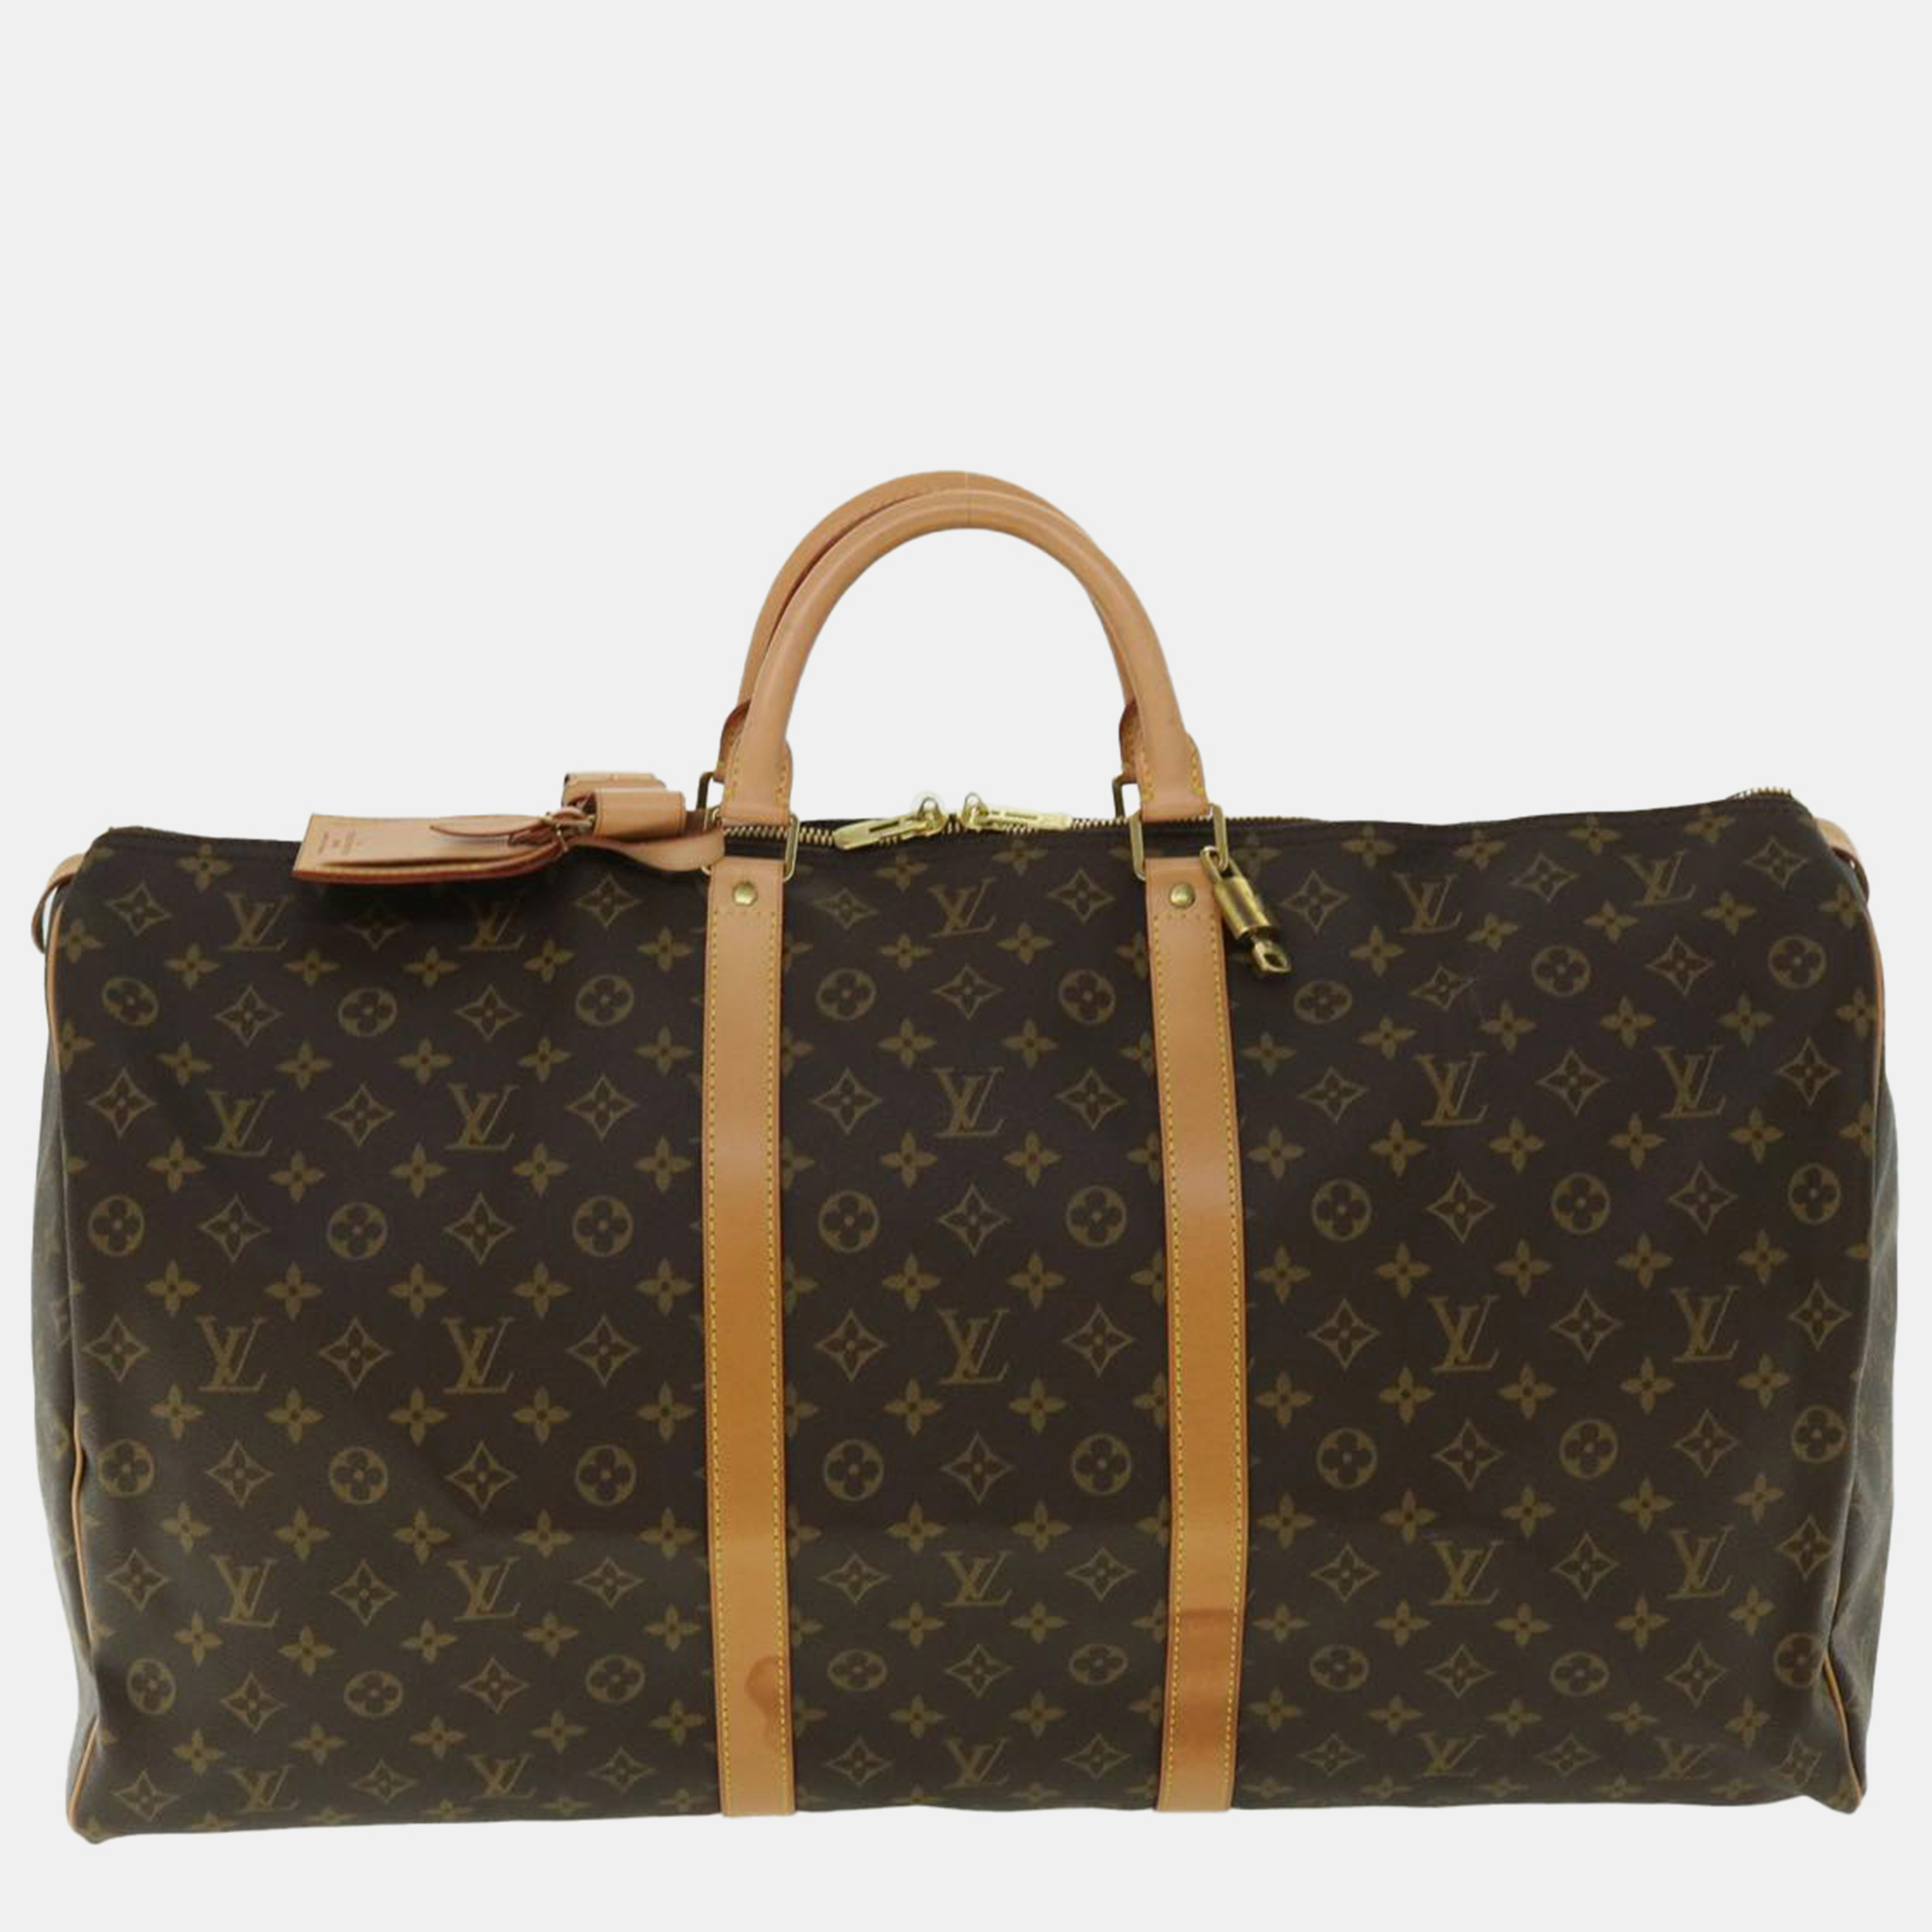 Experience luxury with this Louis Vuitton bag. Meticulously crafted with the best materials its a timeless piece that will elevate any outfit.